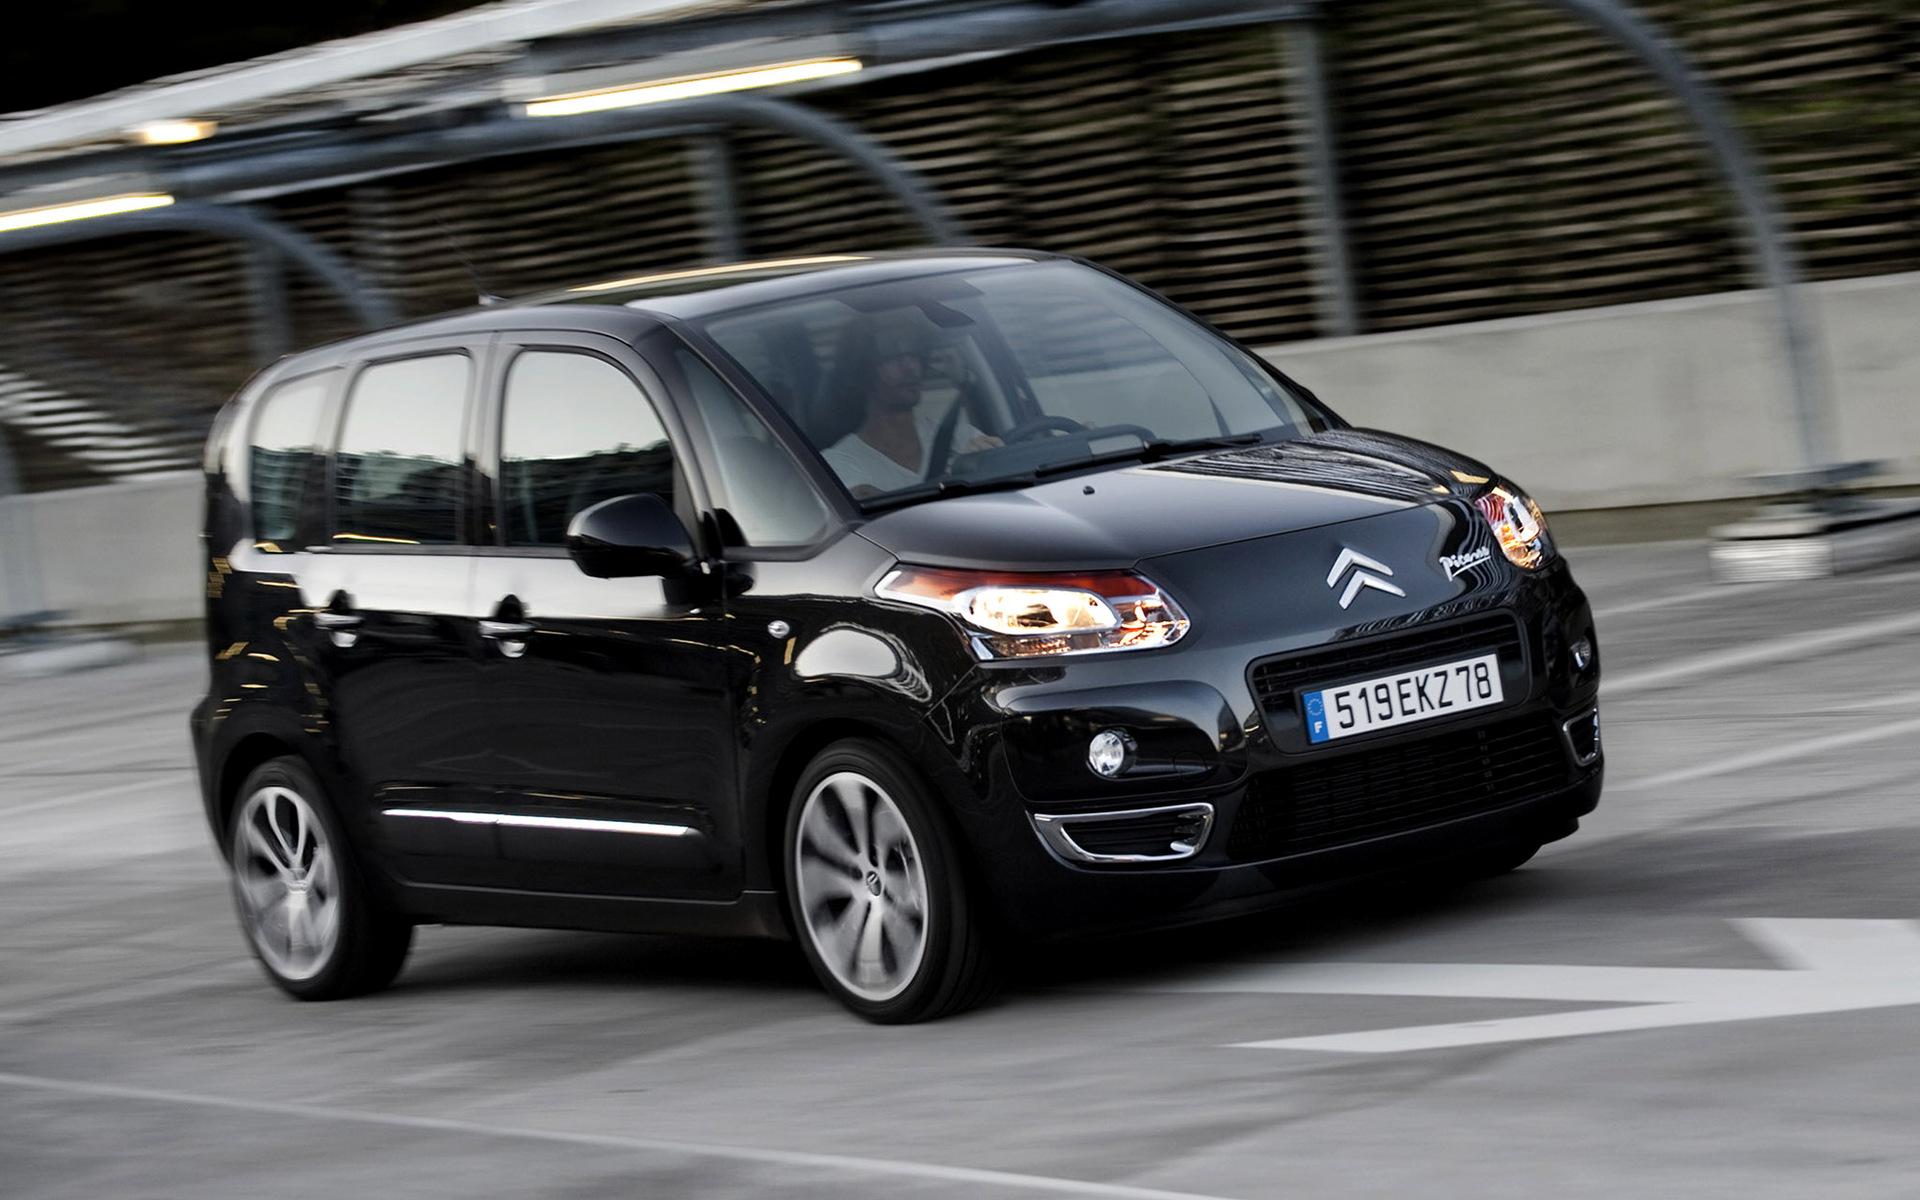 Citroen C3 Picasso and HD Image